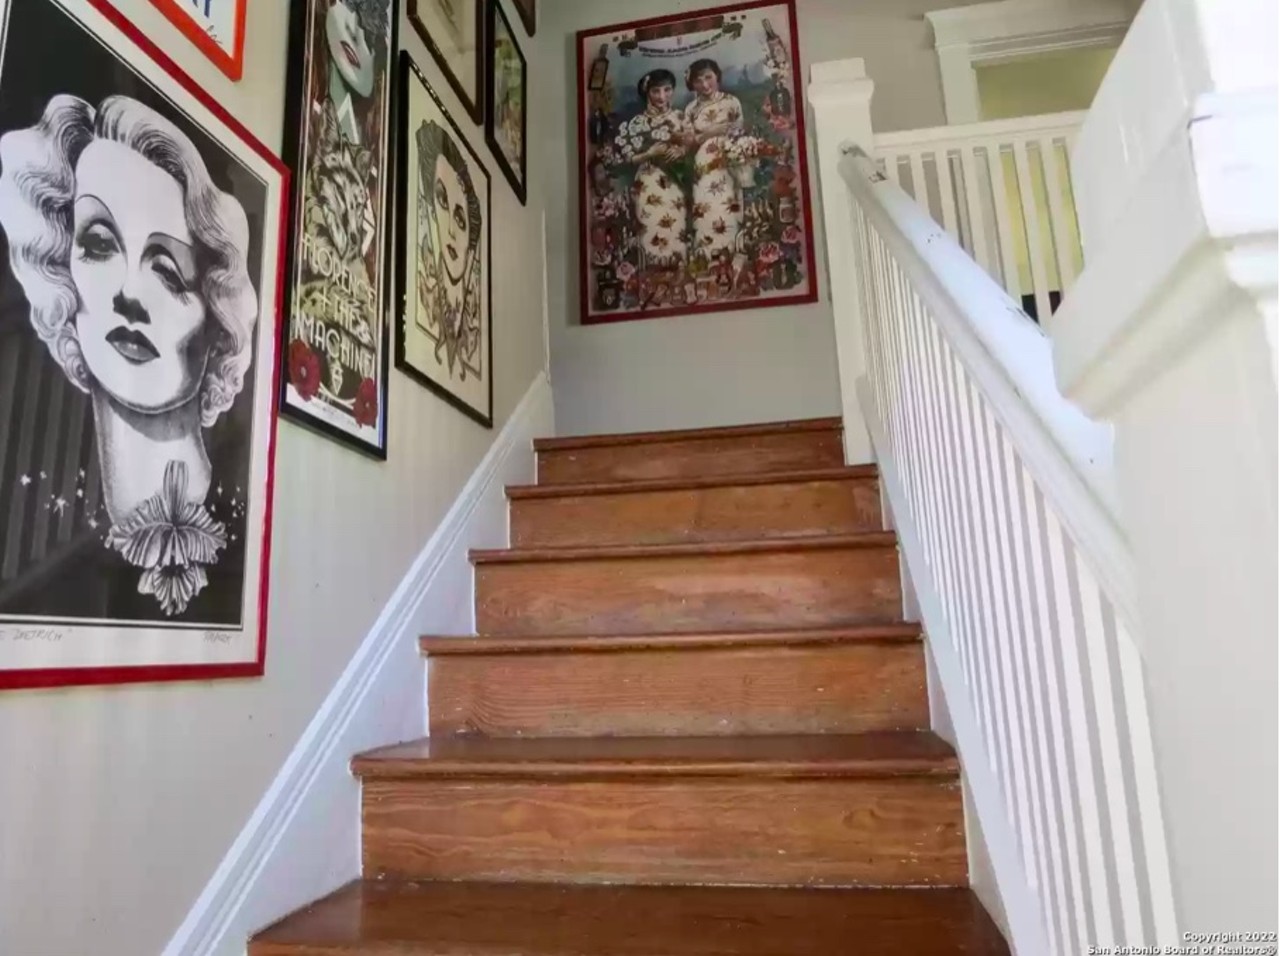 This two-story charmer was one of the first houses in San Antonio's Beacon Hill neighborhood